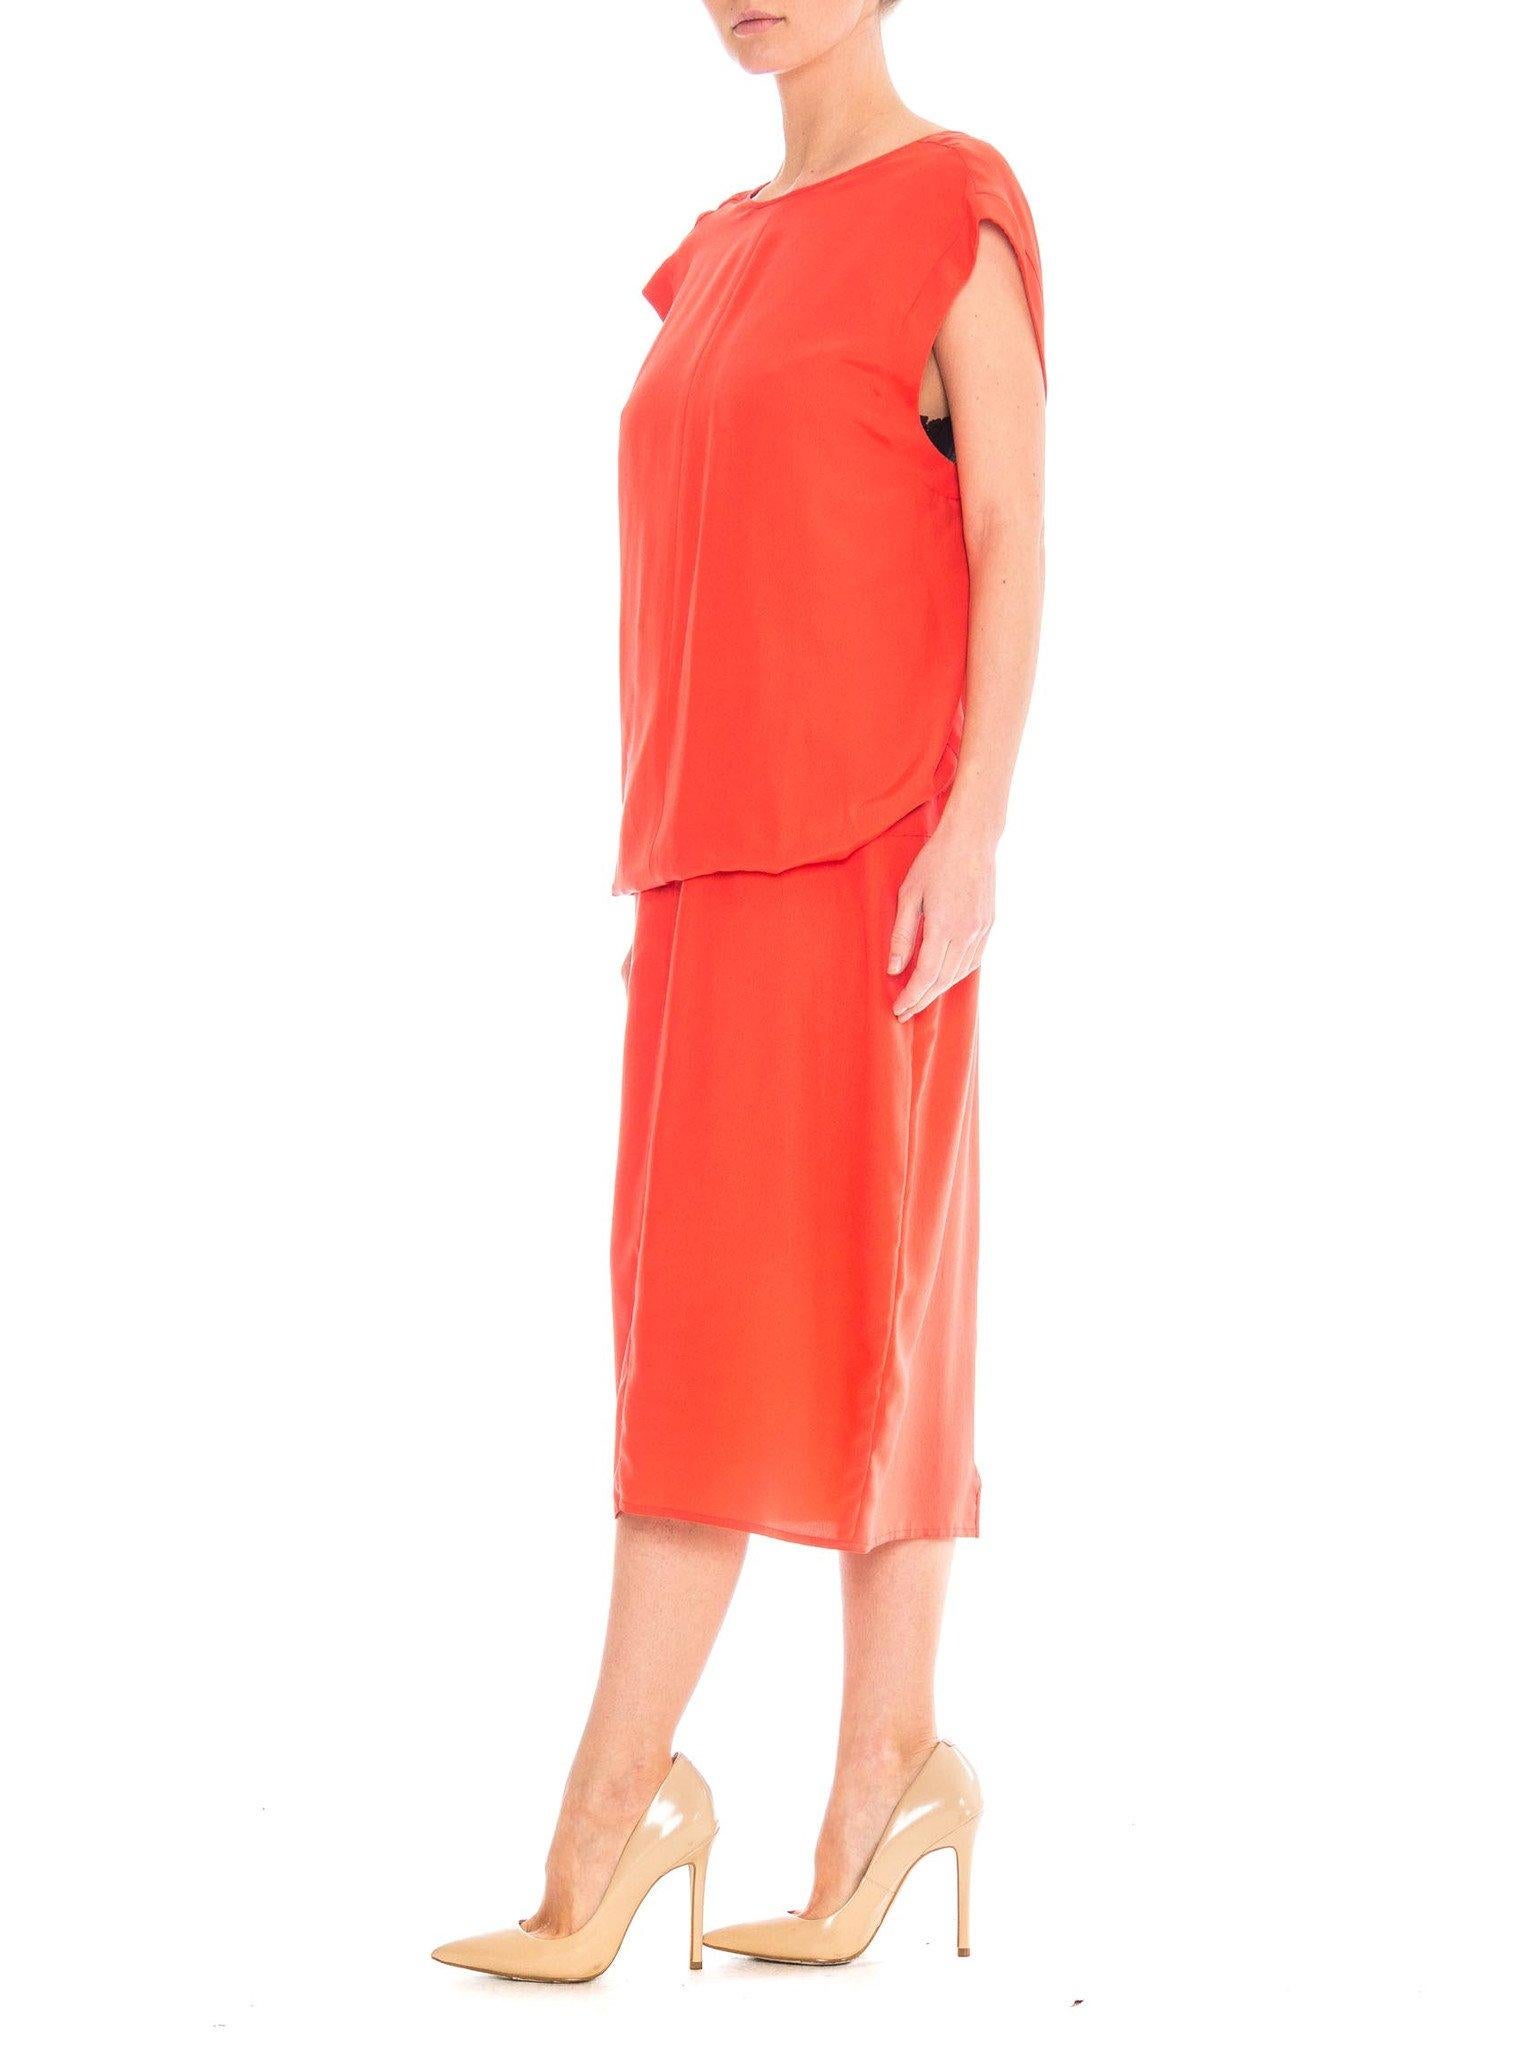 1980 GIANFRANCO FERRE Coral Light Weight Silk Low Back Minimalist Dress For Sale 2